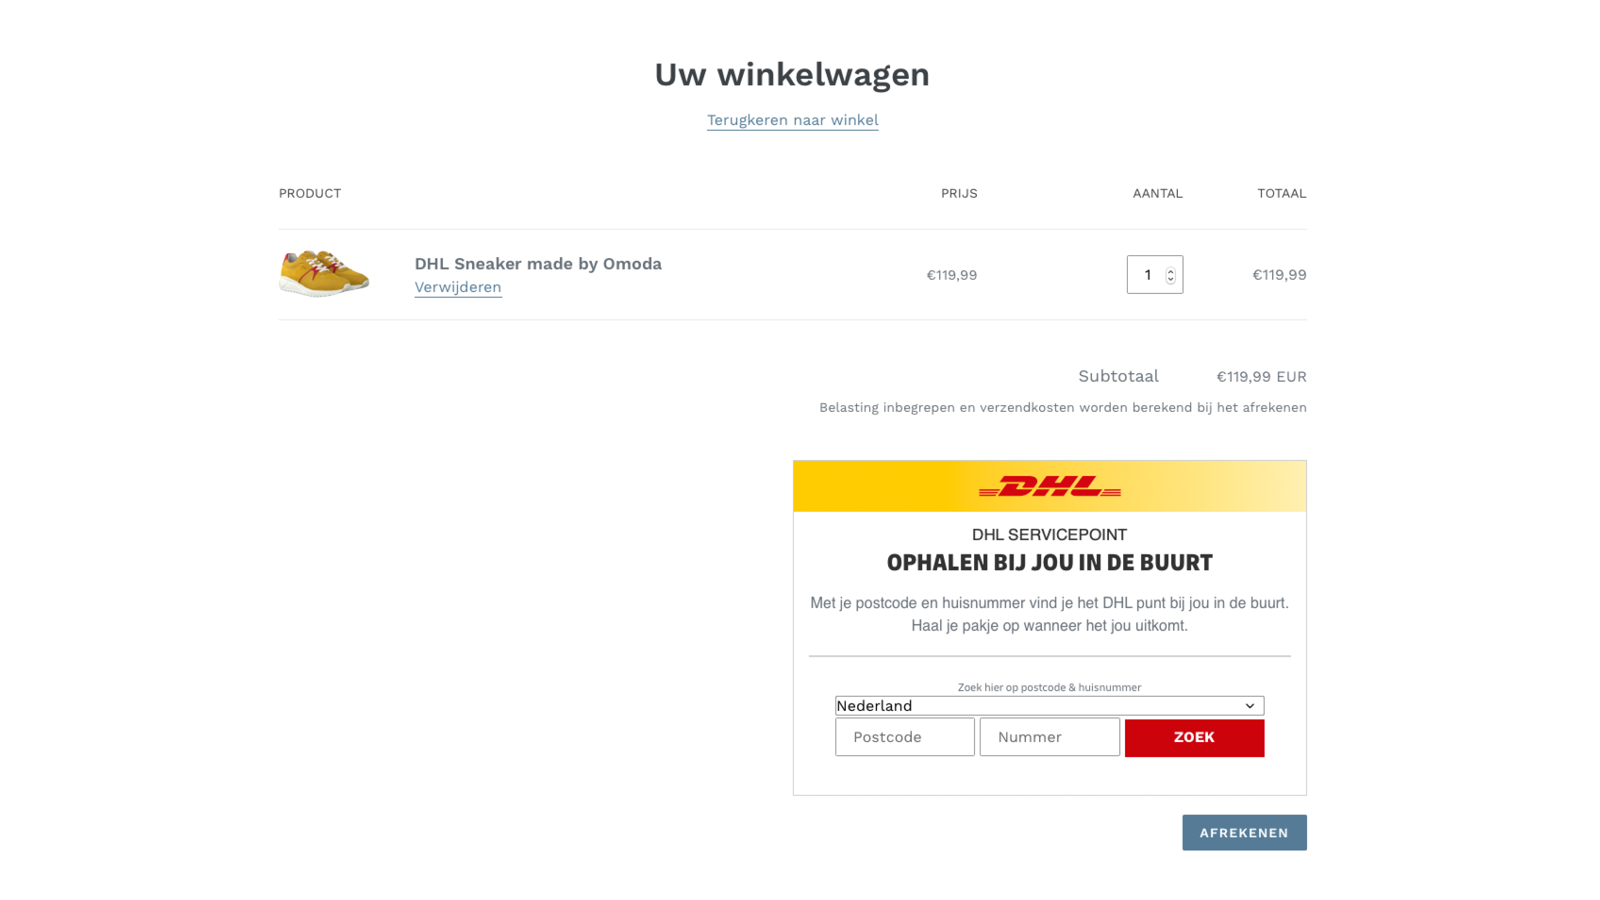 The nearest DHL ServicePoint is shown in the shopping cart